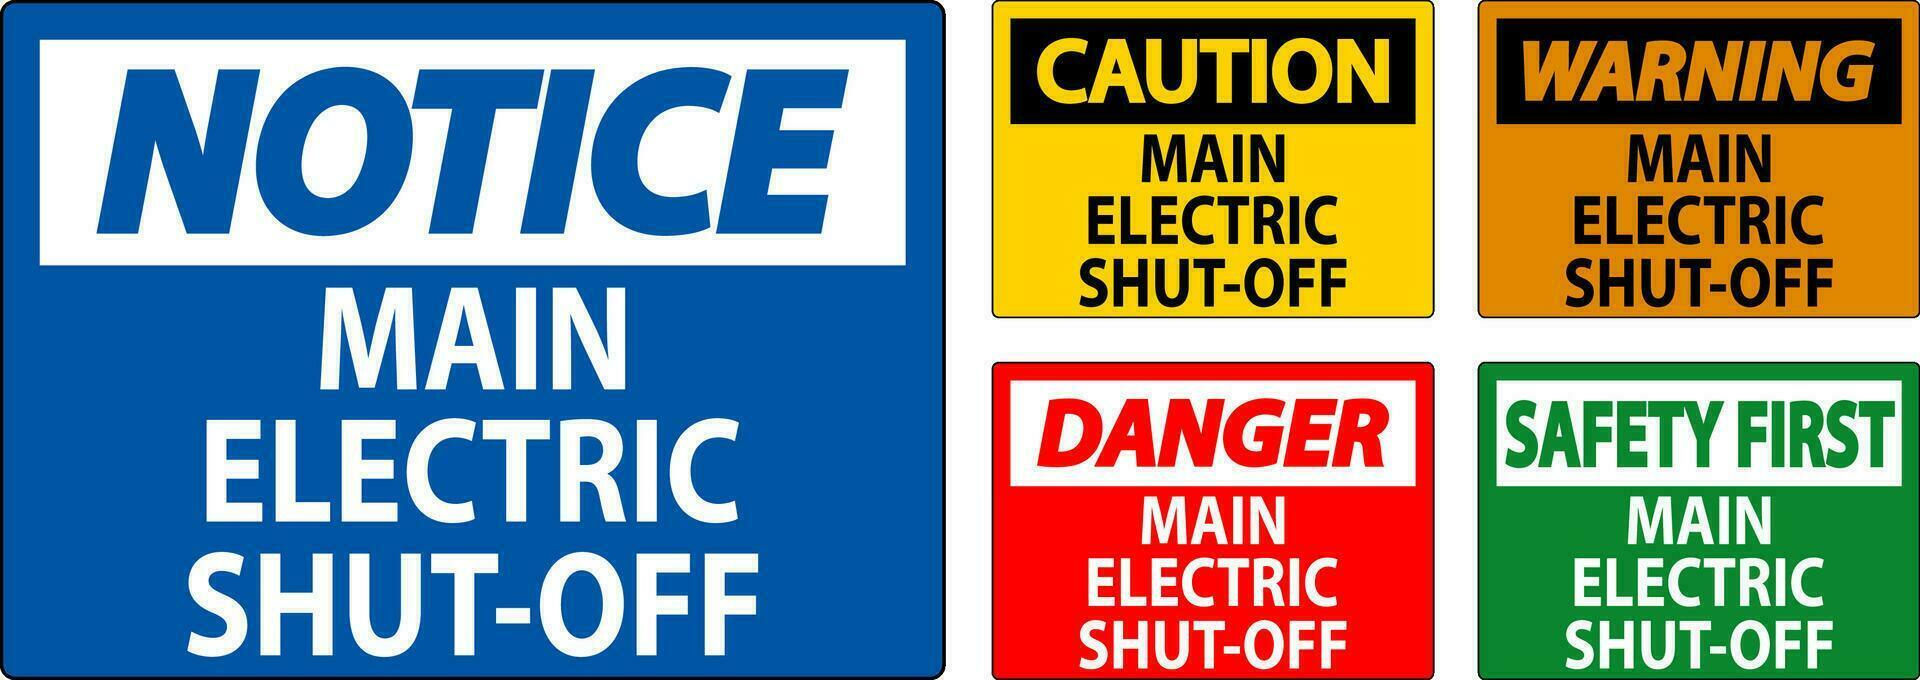 Caution Sign Main Electric Shut-Off vector